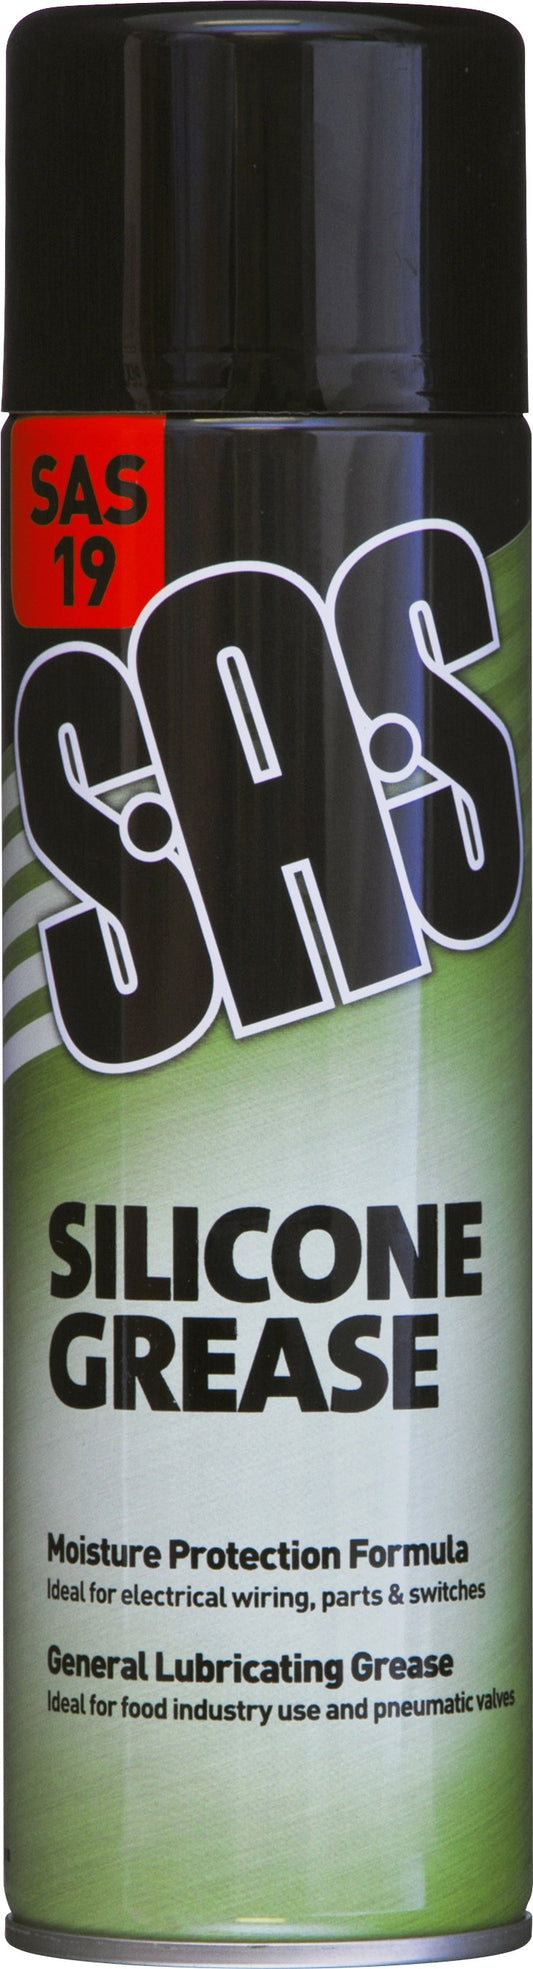 S.A.S Silicone Grease 500ml